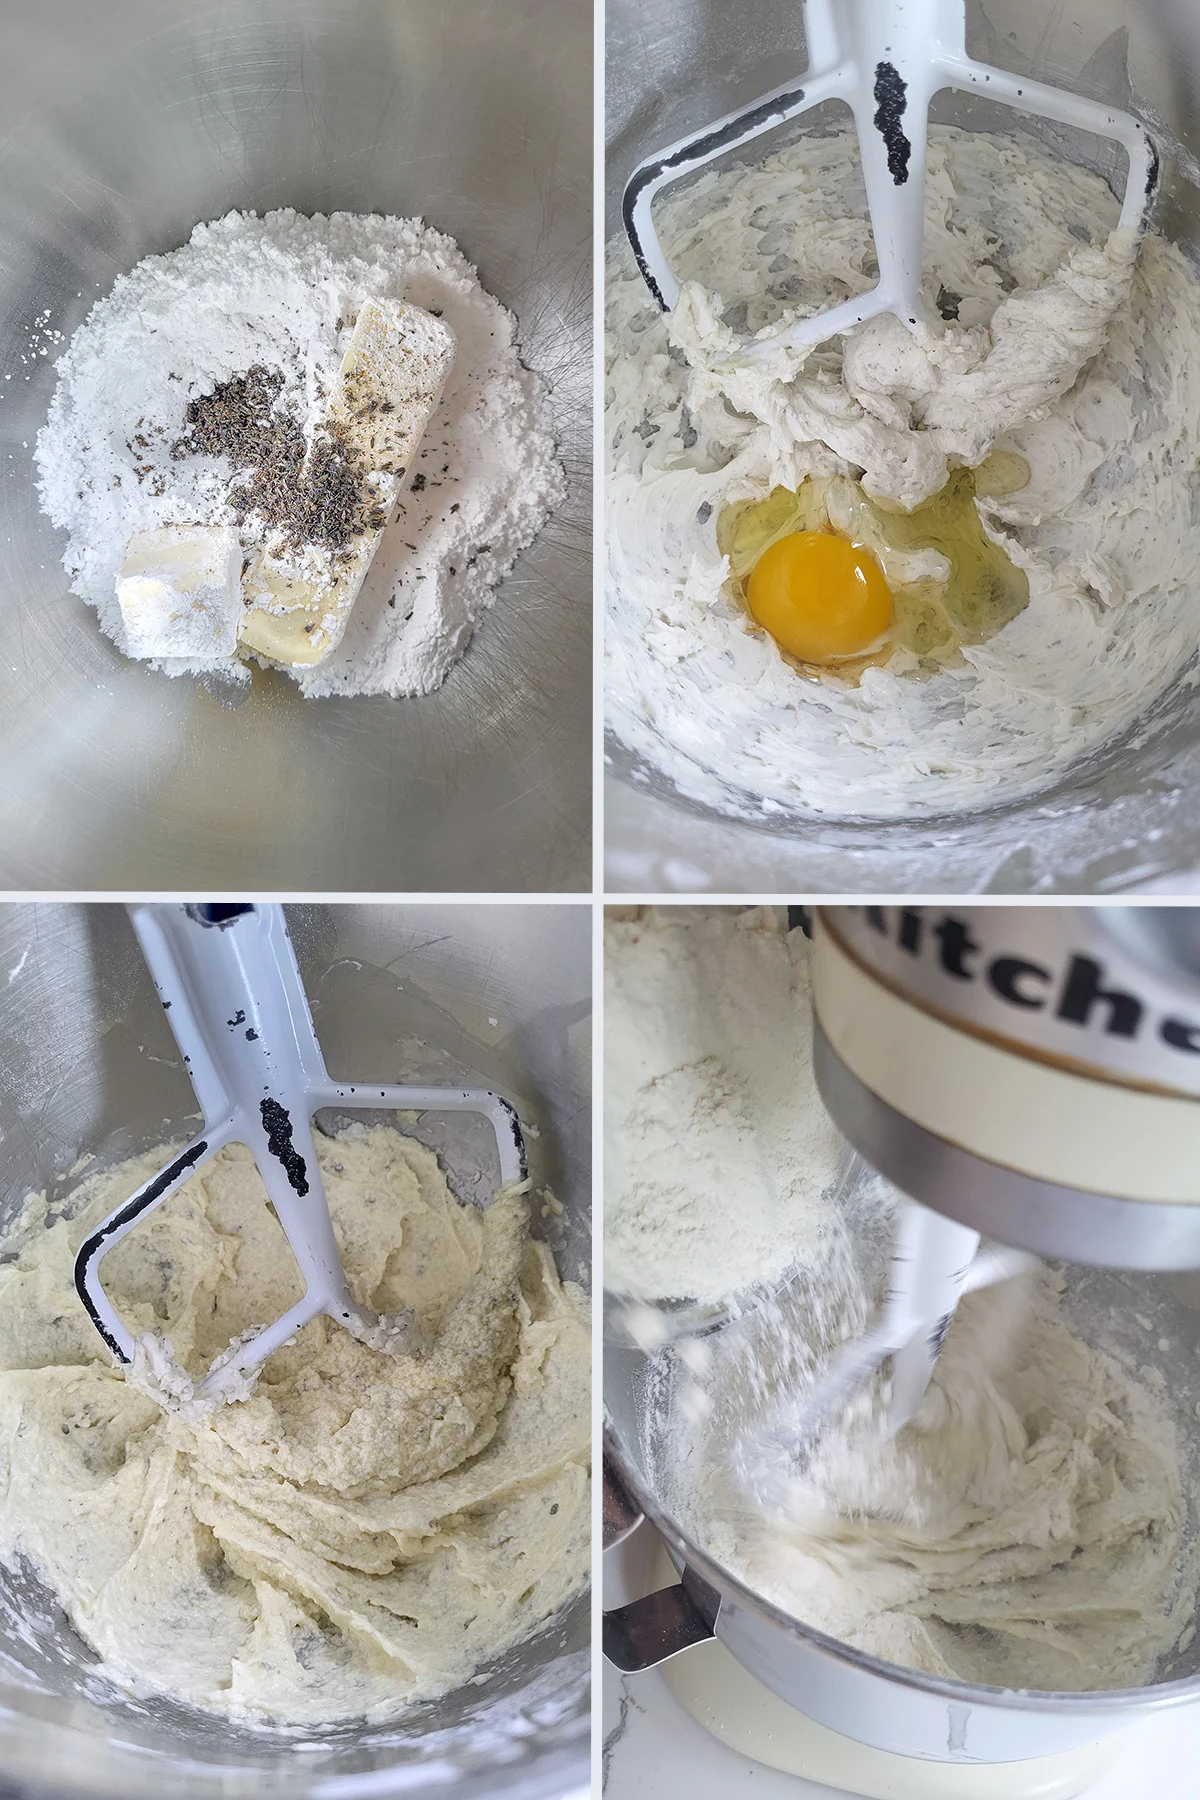 Butter, sugar and lavender creamed in a mixing bowl with egg and flour added.